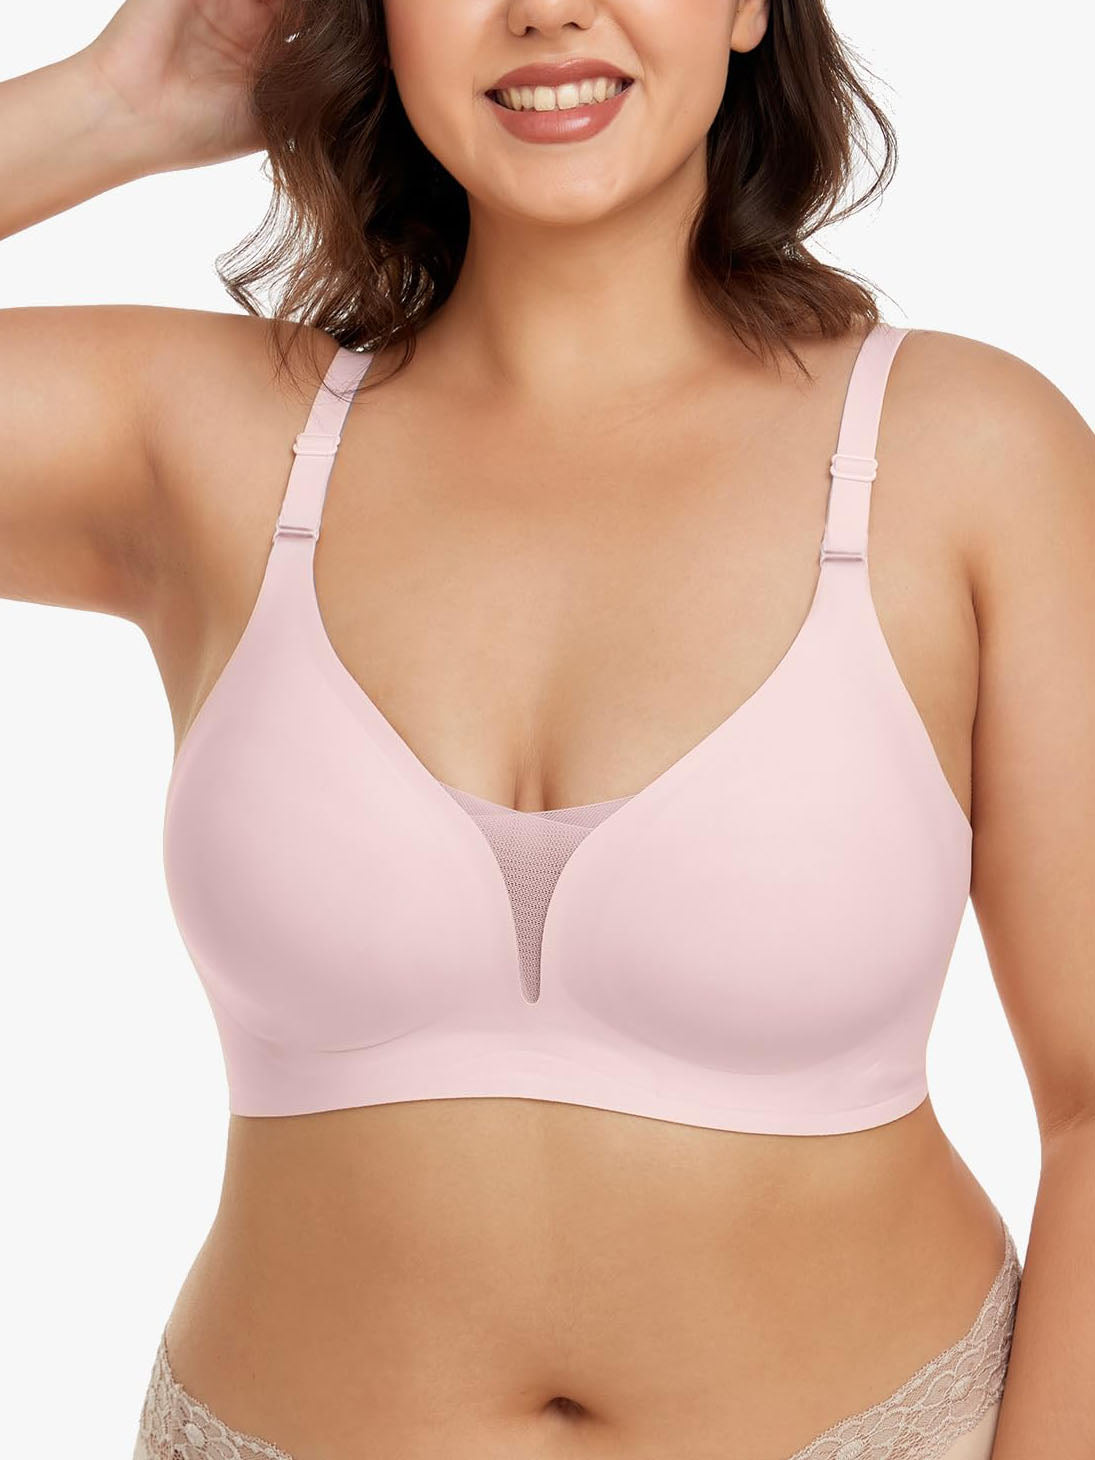 Mesh Bras for Women No Underwire Wireless Comfort Lift Push Up Bralettes for Women with Support and Bra Pink